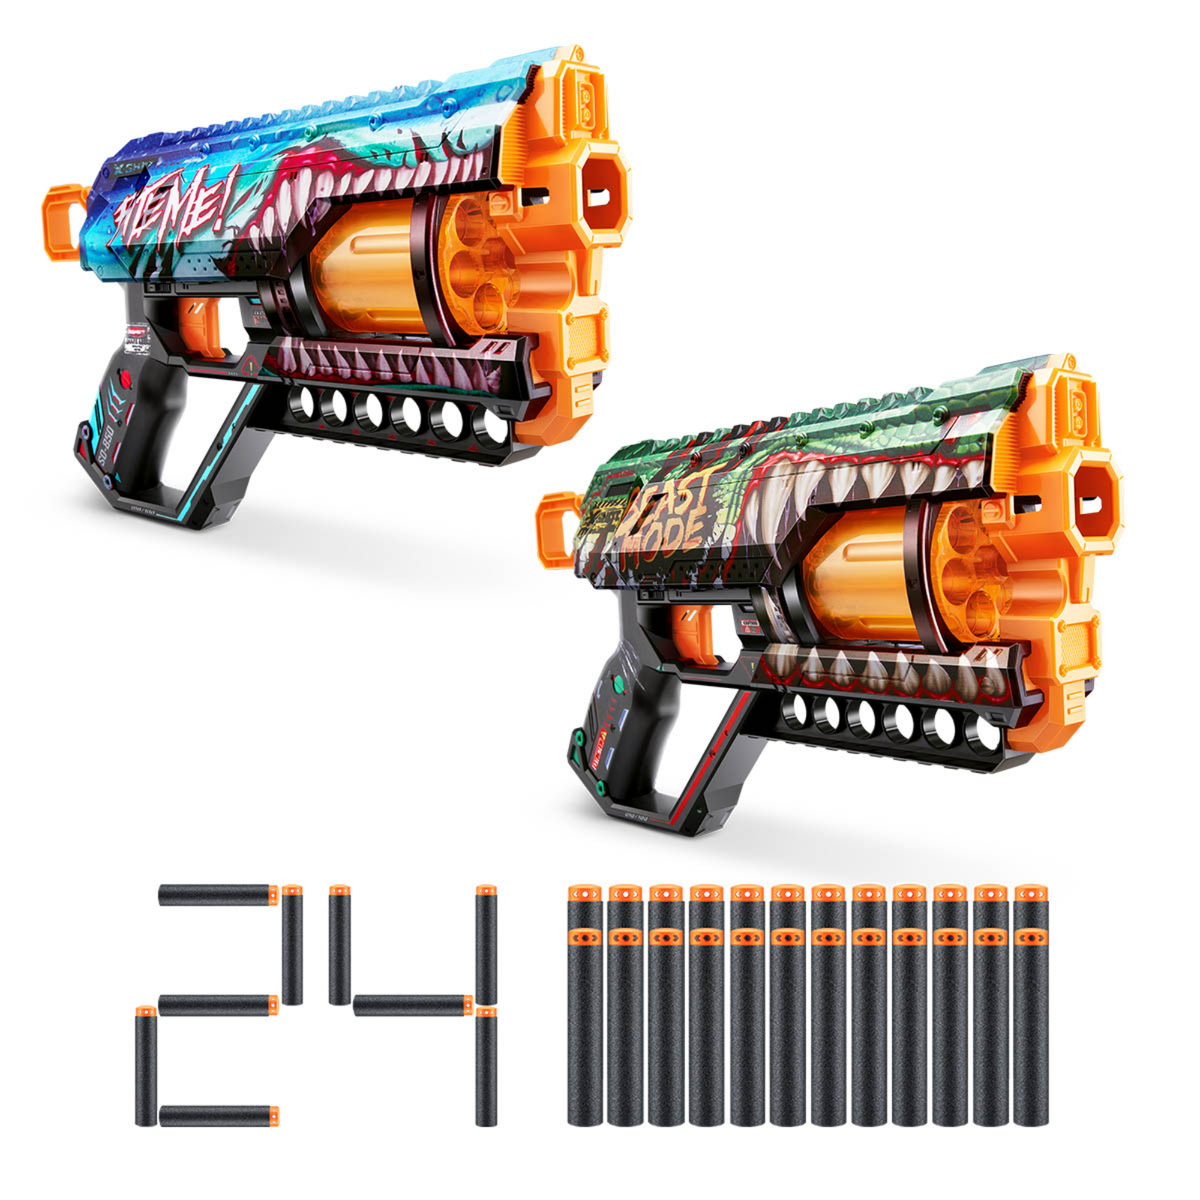 X-Shot Griefer Double Pack with 24 Darts, 1 Pc, Assorted, Multicolour, 36562